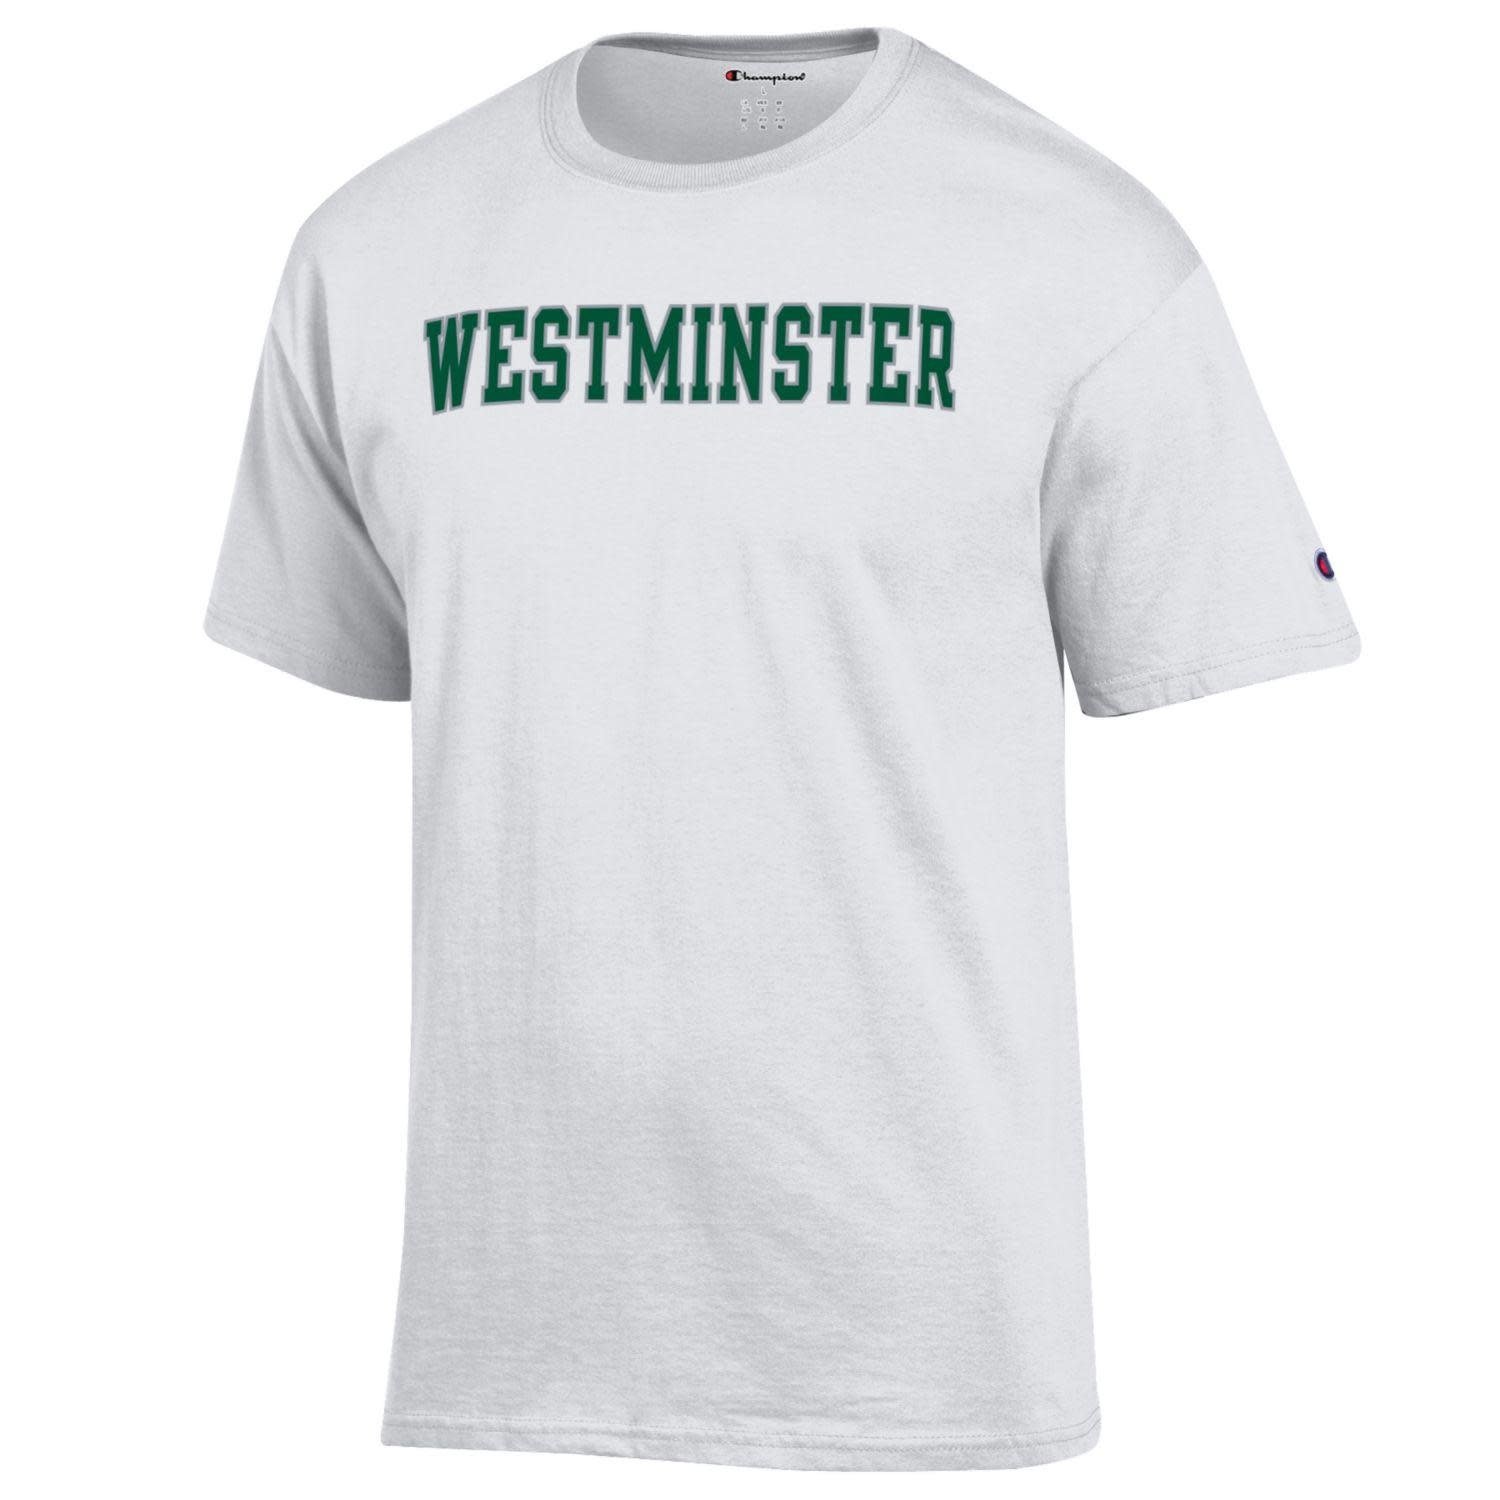 Champion T: Champion Jersey Westminster SS Tee